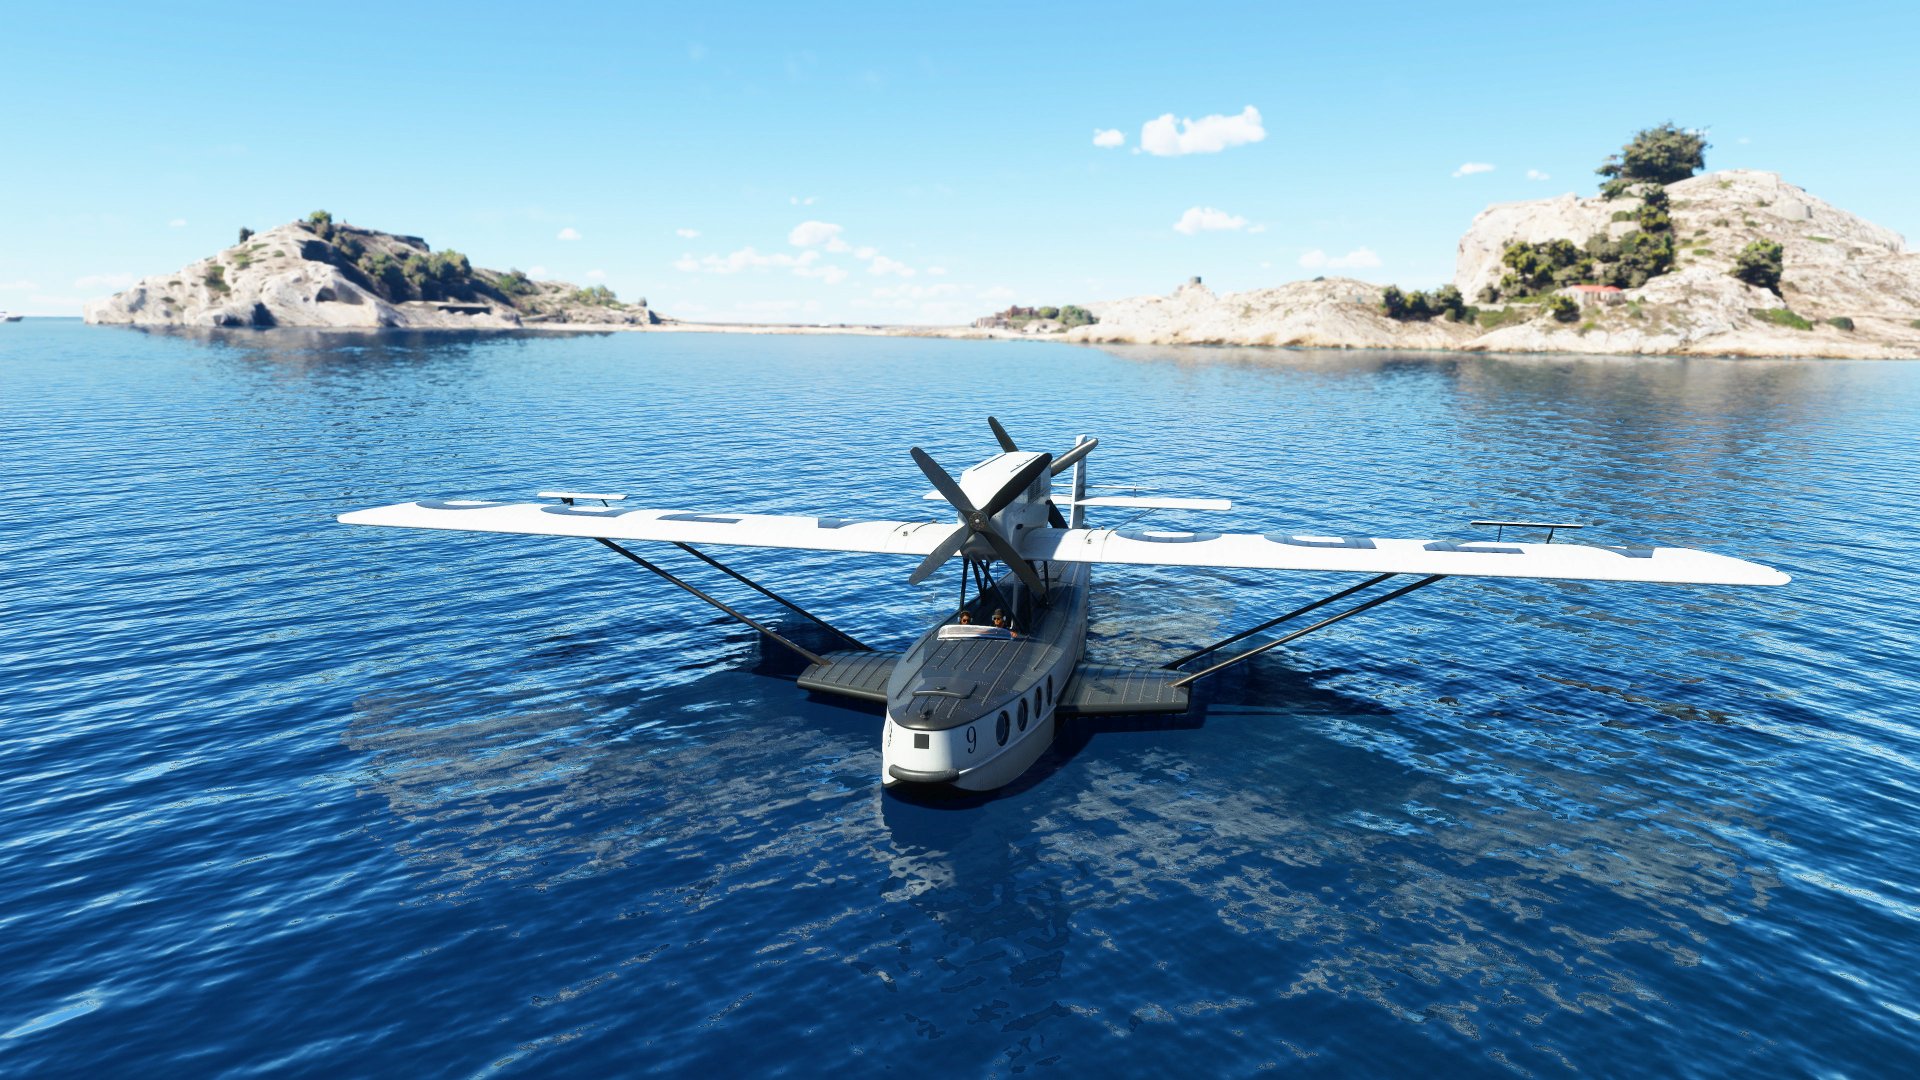 Microsoft Flight Simulator Releases New Aircraft in the “Local Legends” Series Today with Dornier Do J Wal